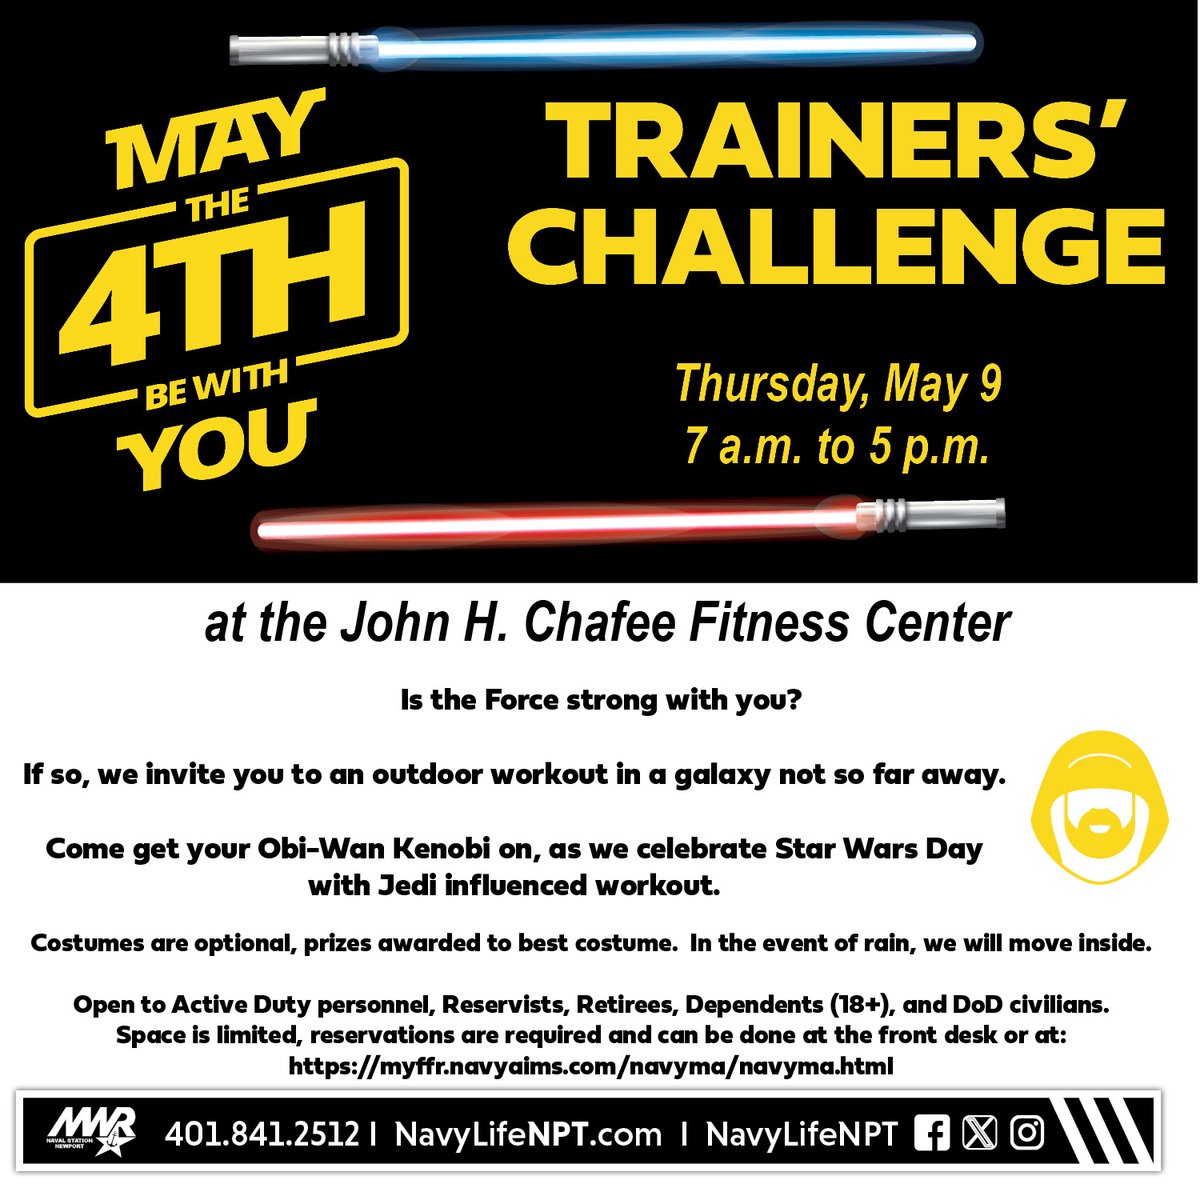 **NEW DATE***We moved the trainer's challenge to next week, sign up today! Reg at the JHC front desk or  myffr.navyaims.com/navyma/navyma.…
Open to AD, RES, RET, DEP (18+), VET (100% disabled) & DoD w/valid ID & base access.#maythe4thbewithyou #fitnesschallenge #obstaclecourse #navyfitness